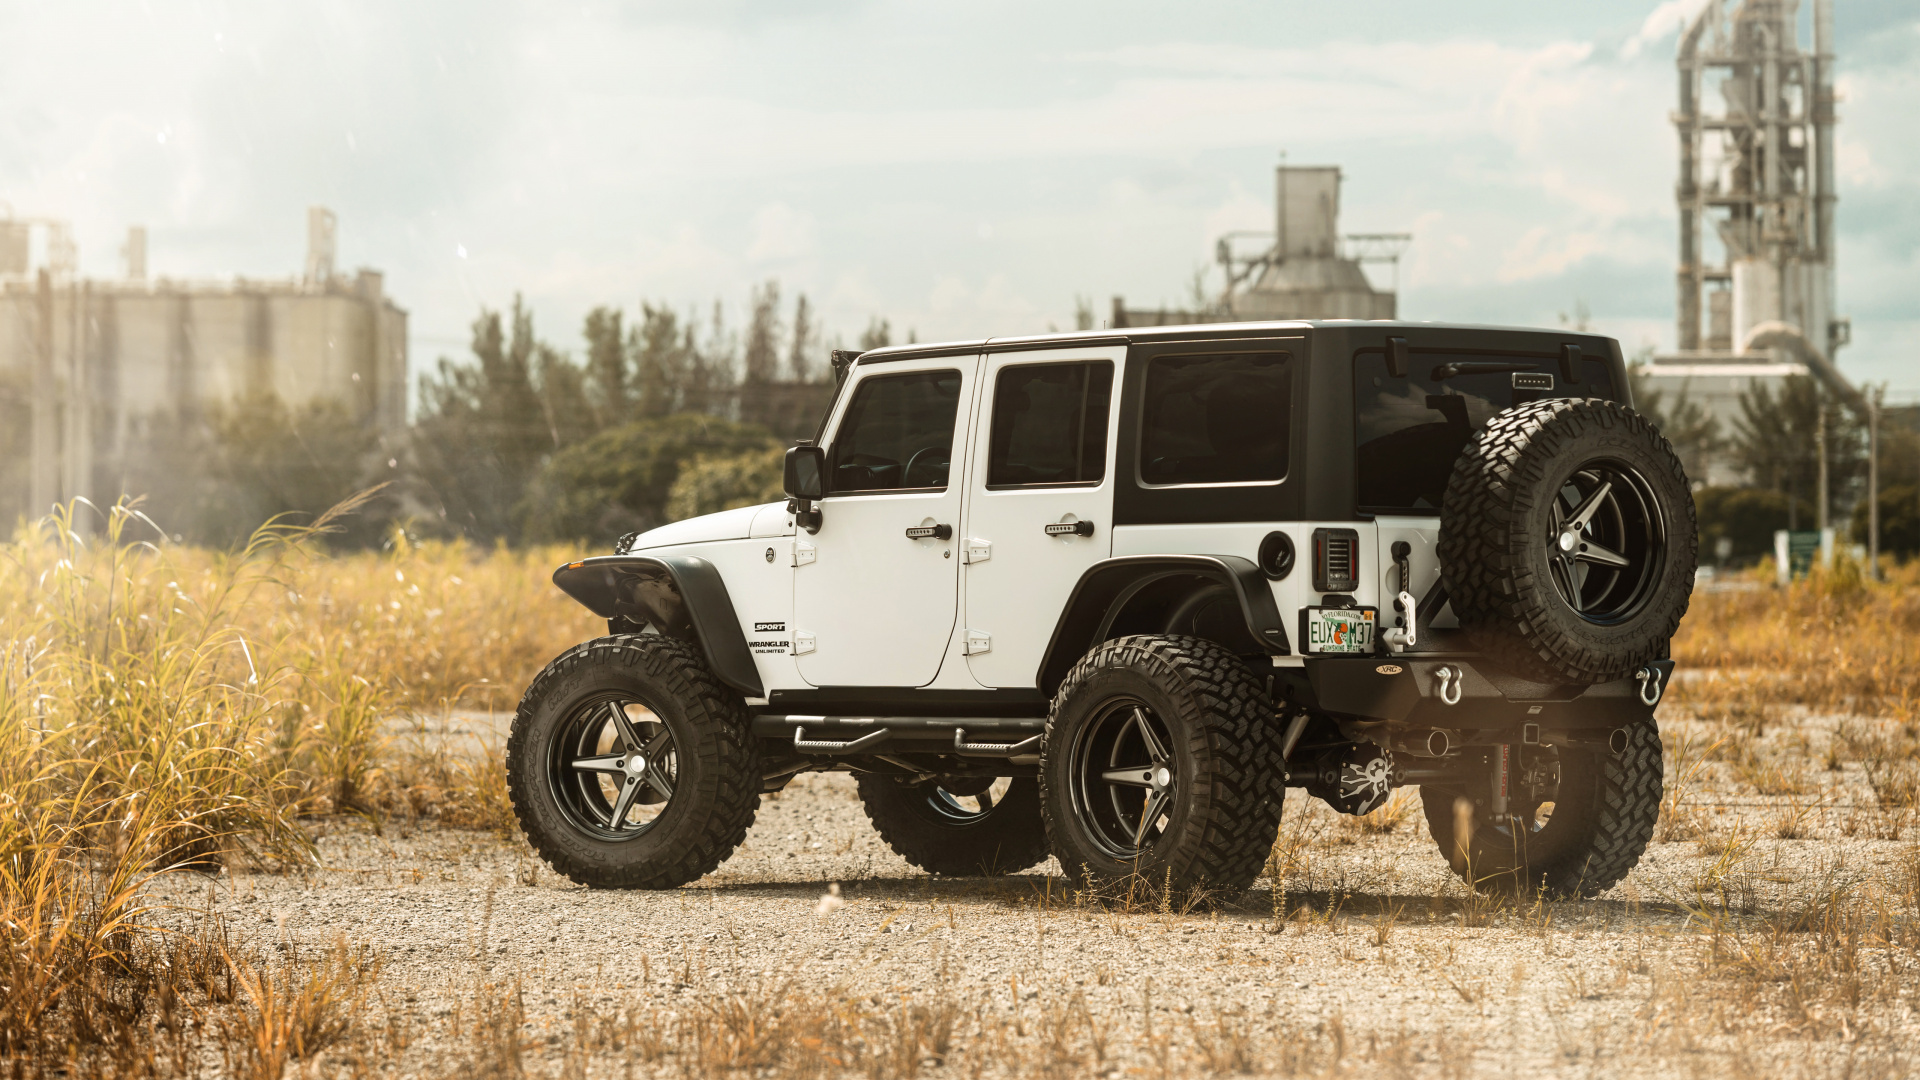 White and Black Jeep Wrangler on Brown Field During Daytime. Wallpaper in 1920x1080 Resolution